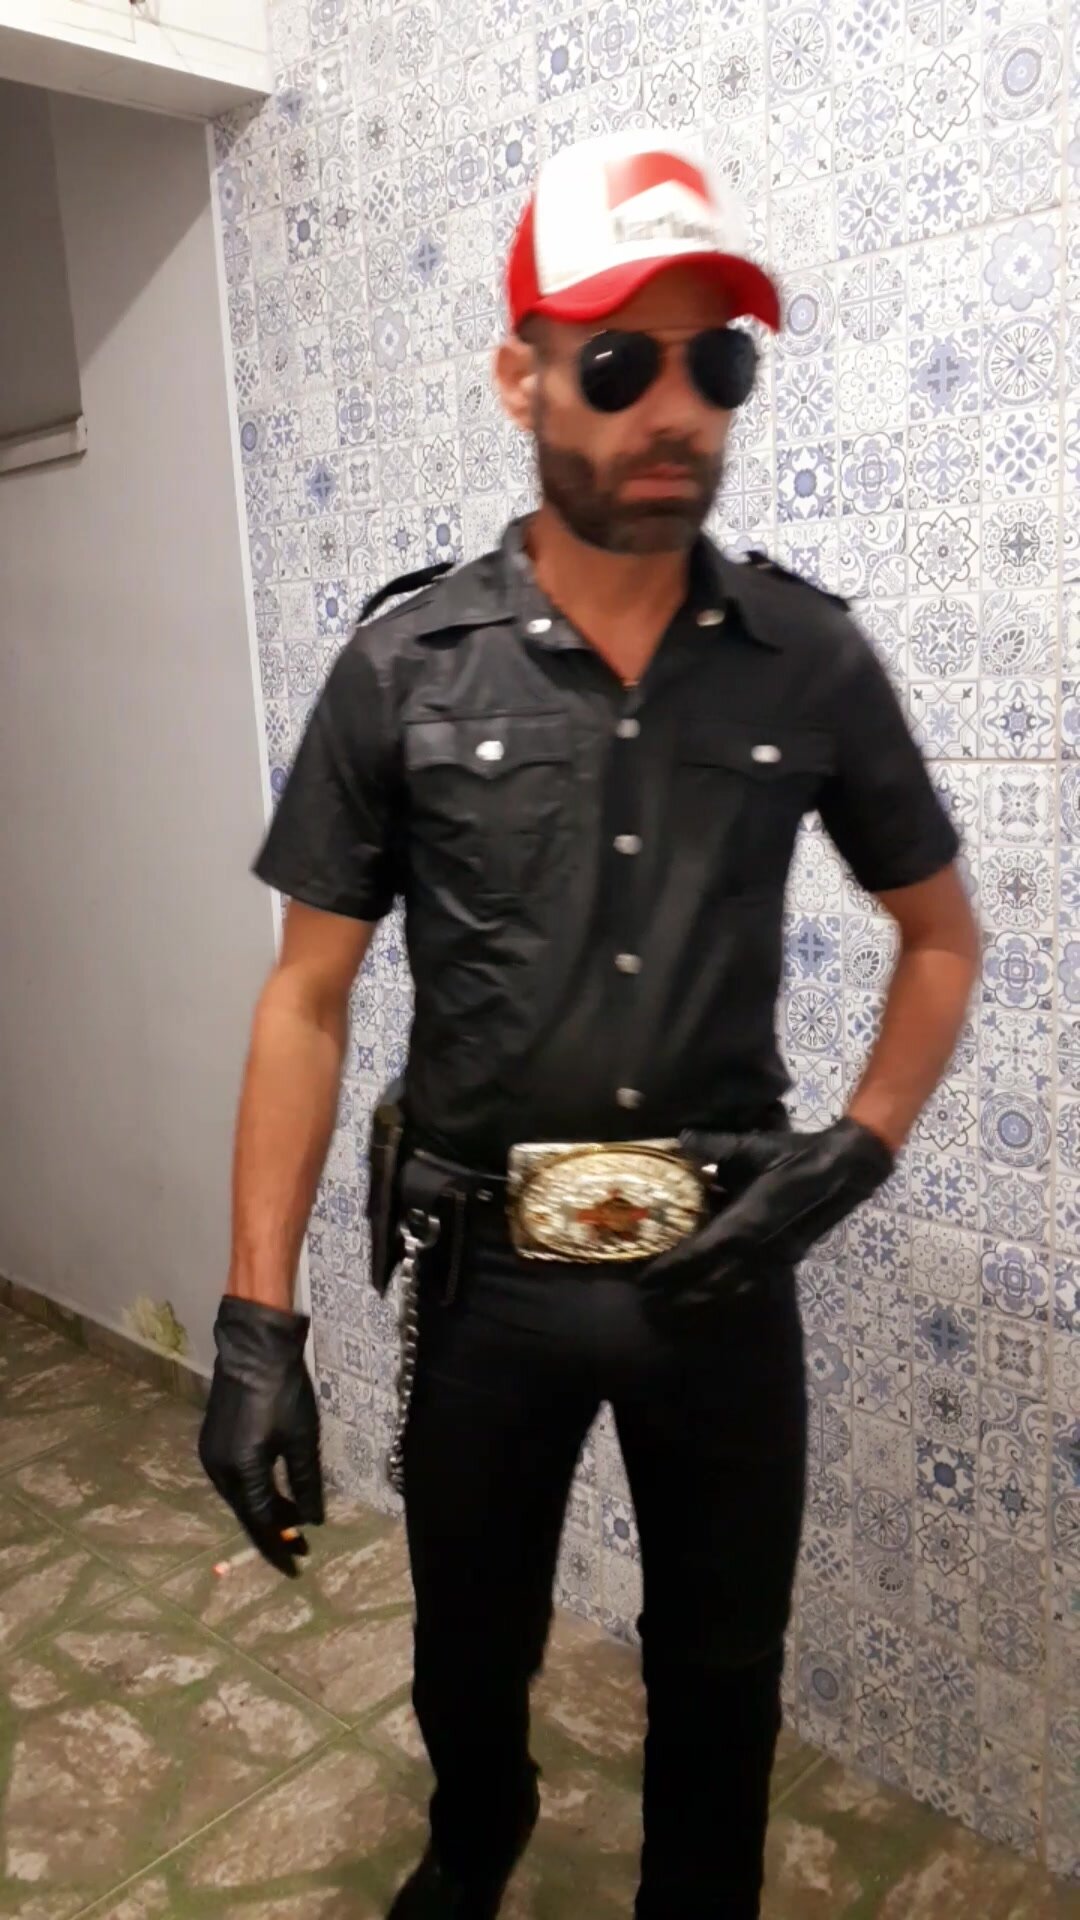 Cowboy with the new leather shirt, smoking